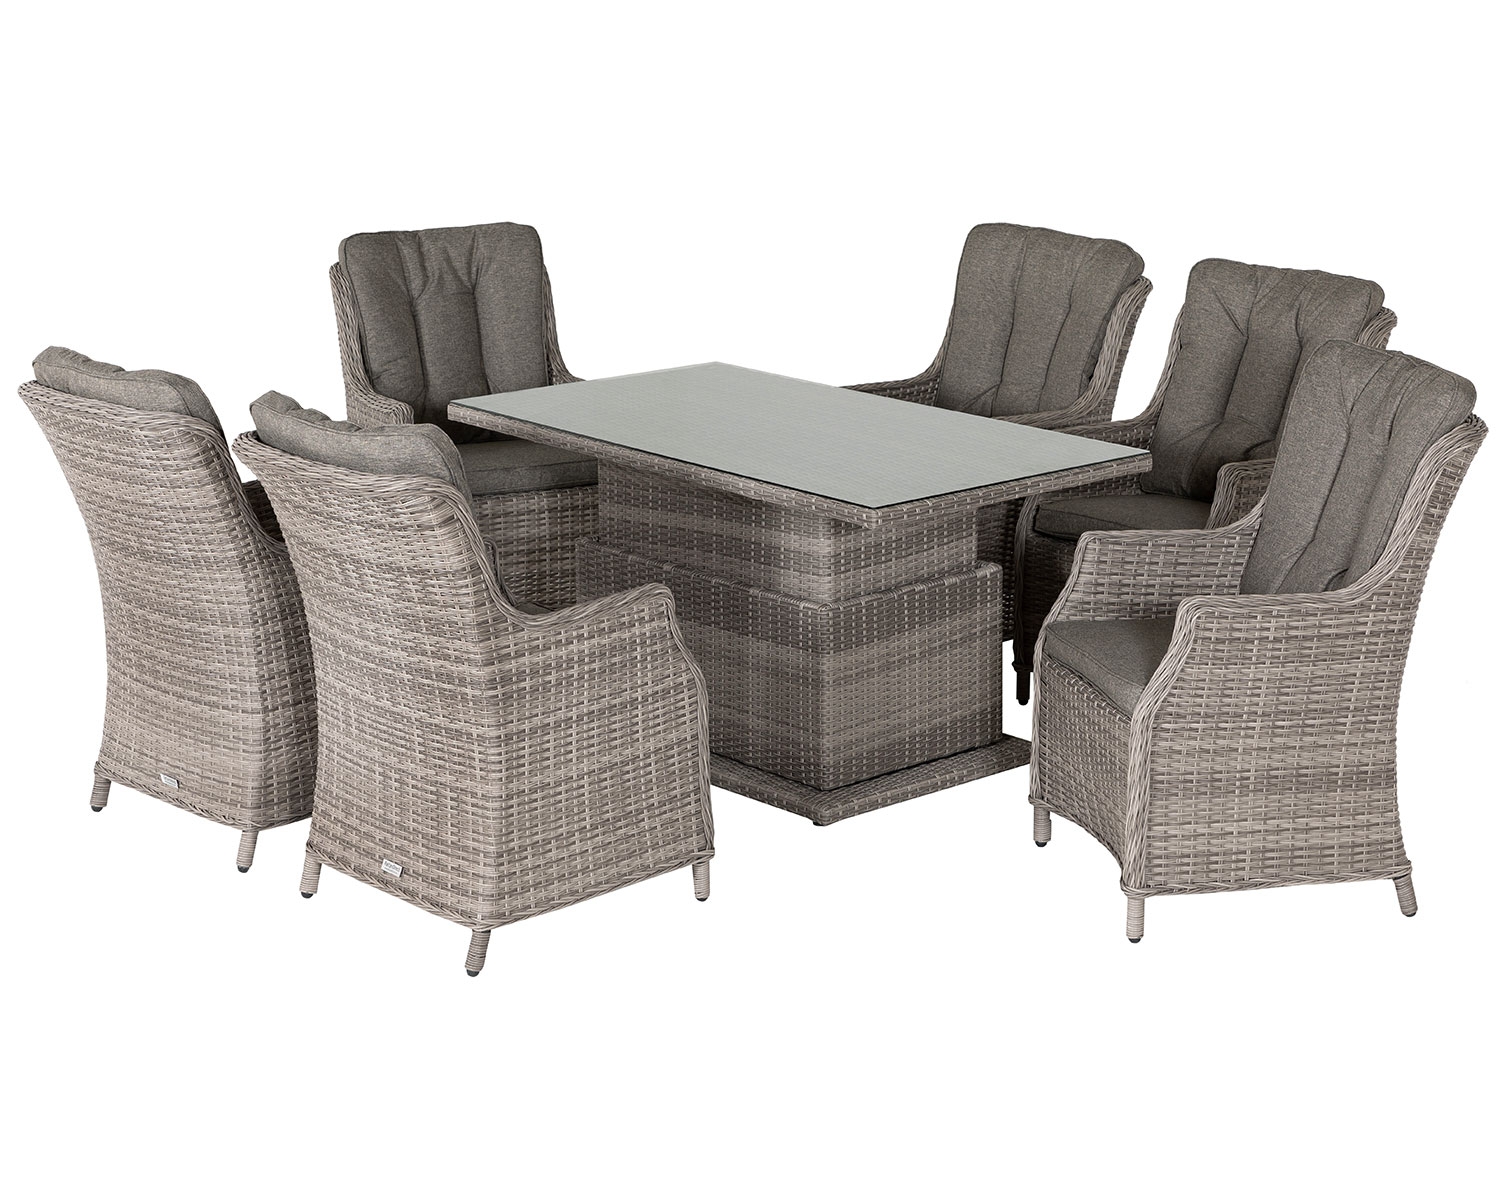 6 Seat Rattan Garden Dining Set With Adjustable Height Table In Grey Riviera Rattan Direct